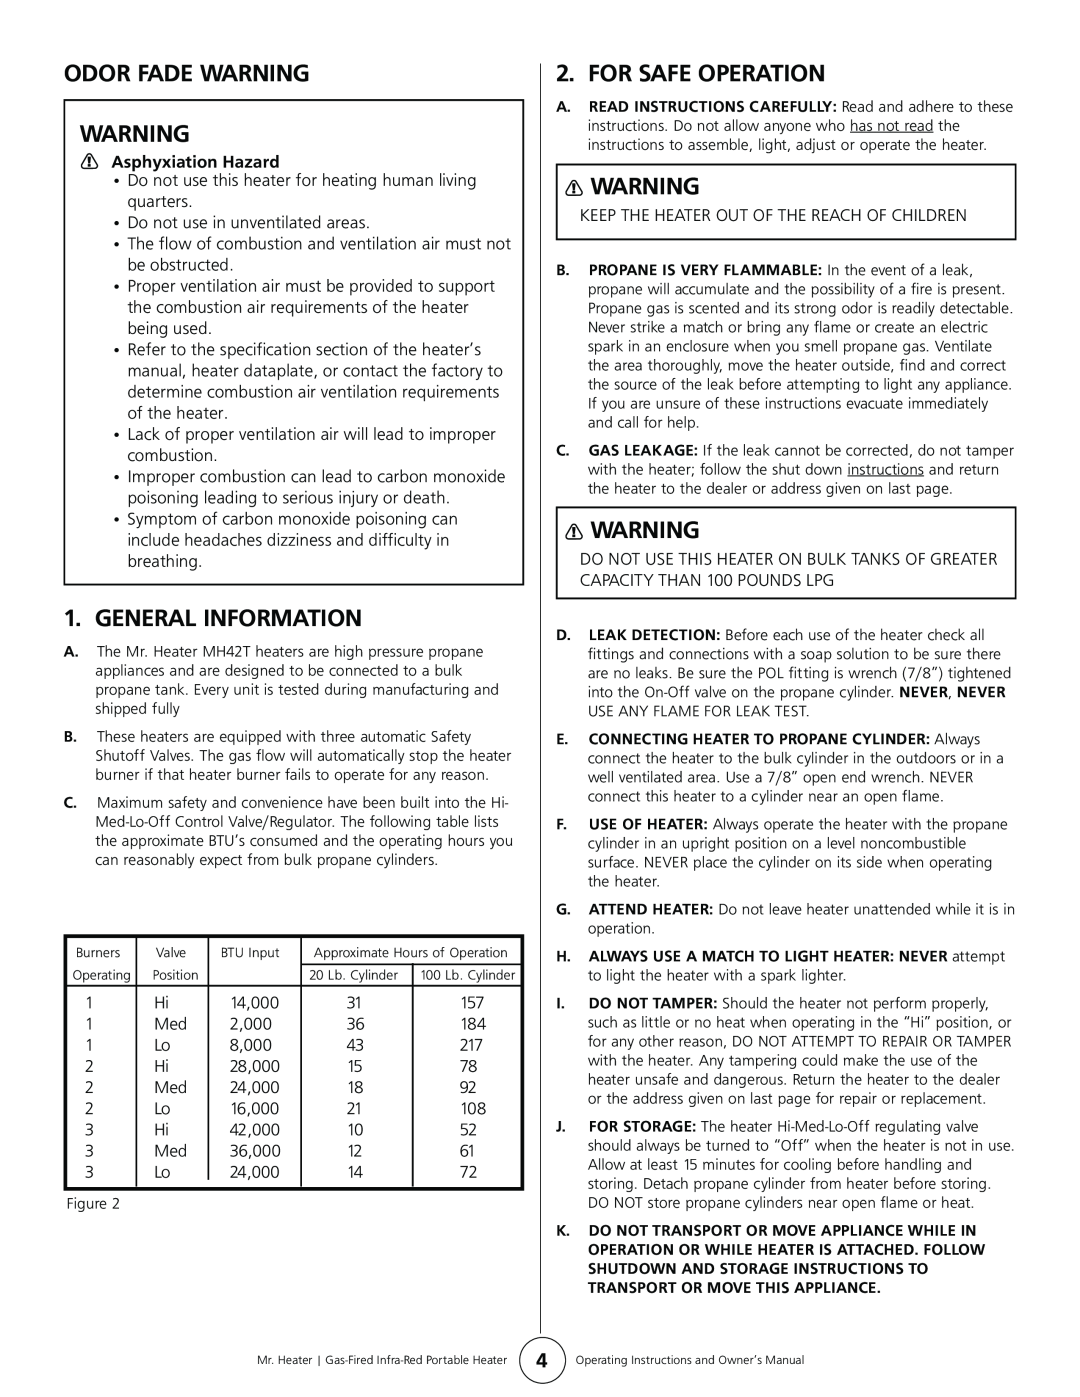 Enerco MH42T operating instructions Odor Fade Warning, General Information, For Safe Operation, Asphyxiation Hazard 